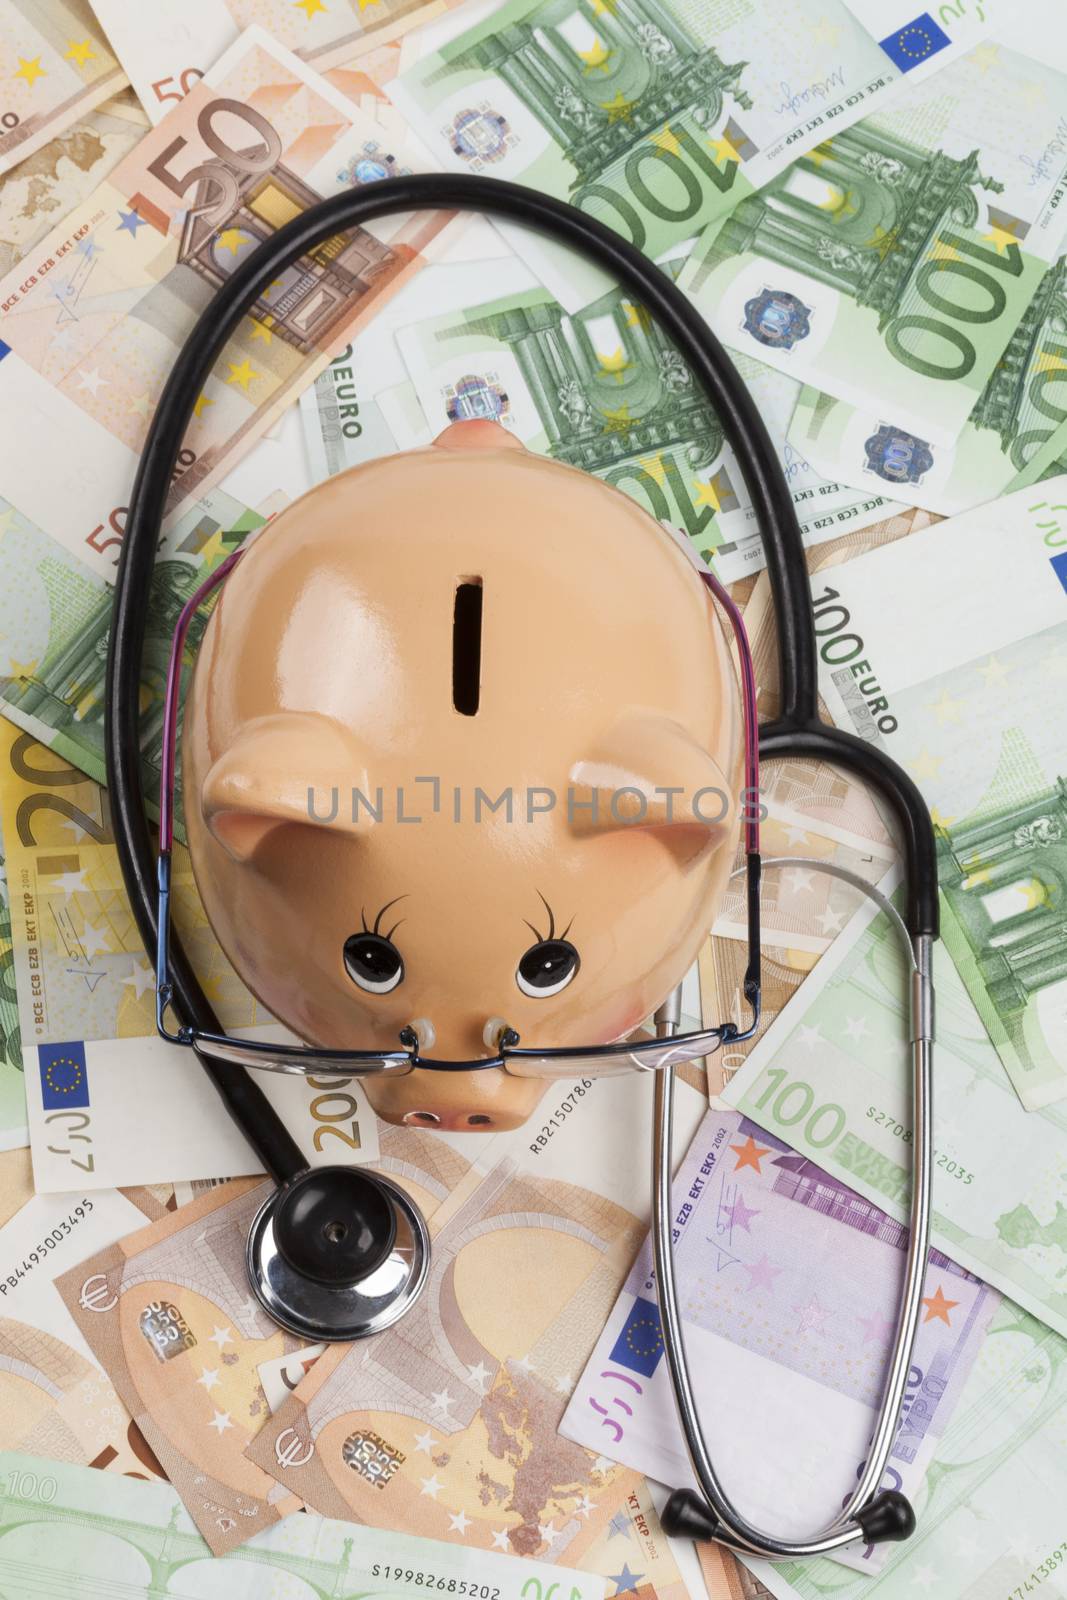 Piggy Bank With Black Stethoscope on Euro Banknotes . European Health Insurance Costs